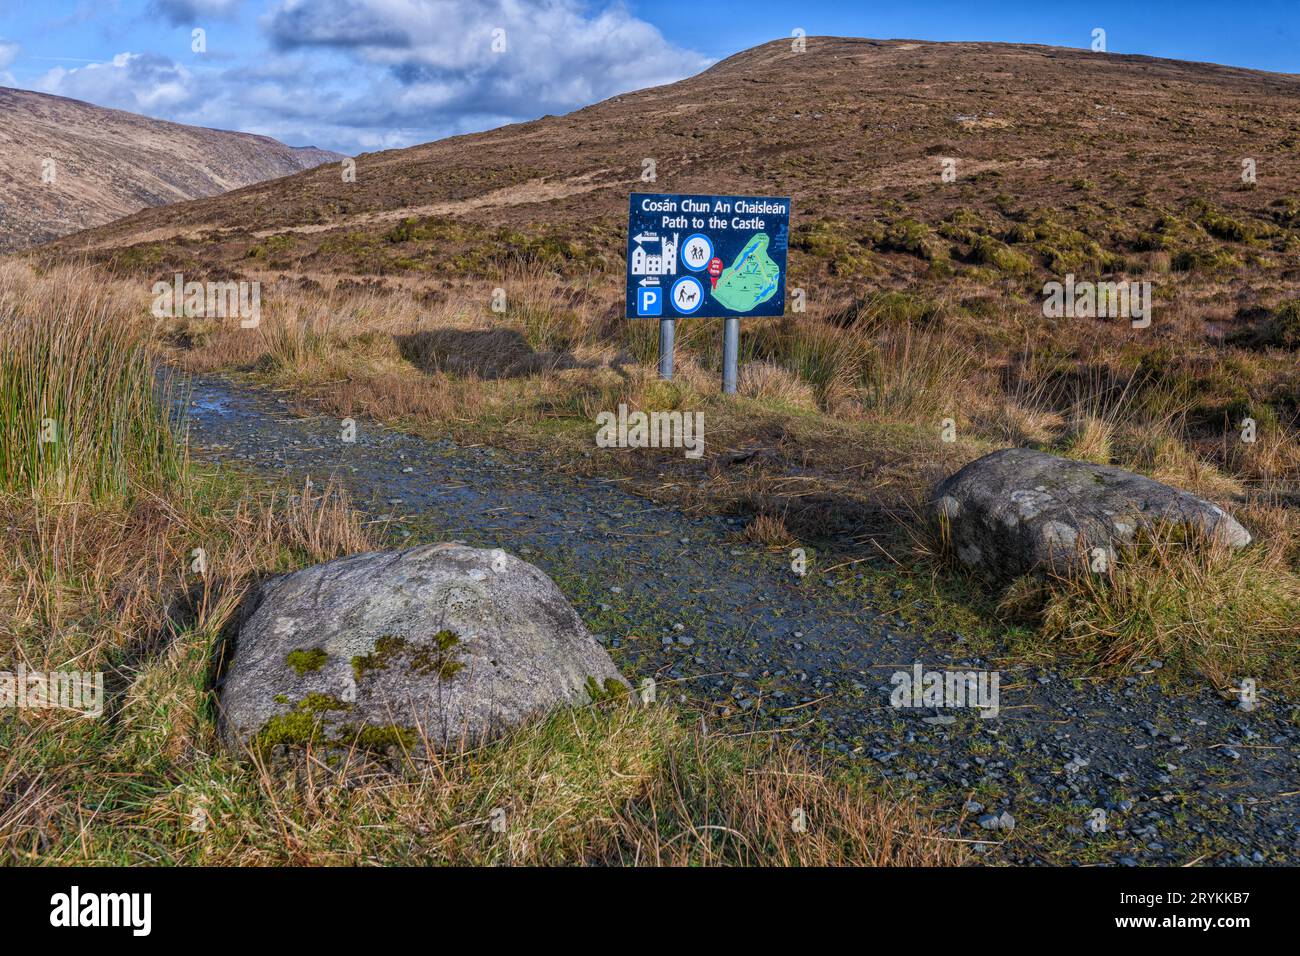 Drumnalifferny Mountain, Co Donegal, Irlande Banque D'Images